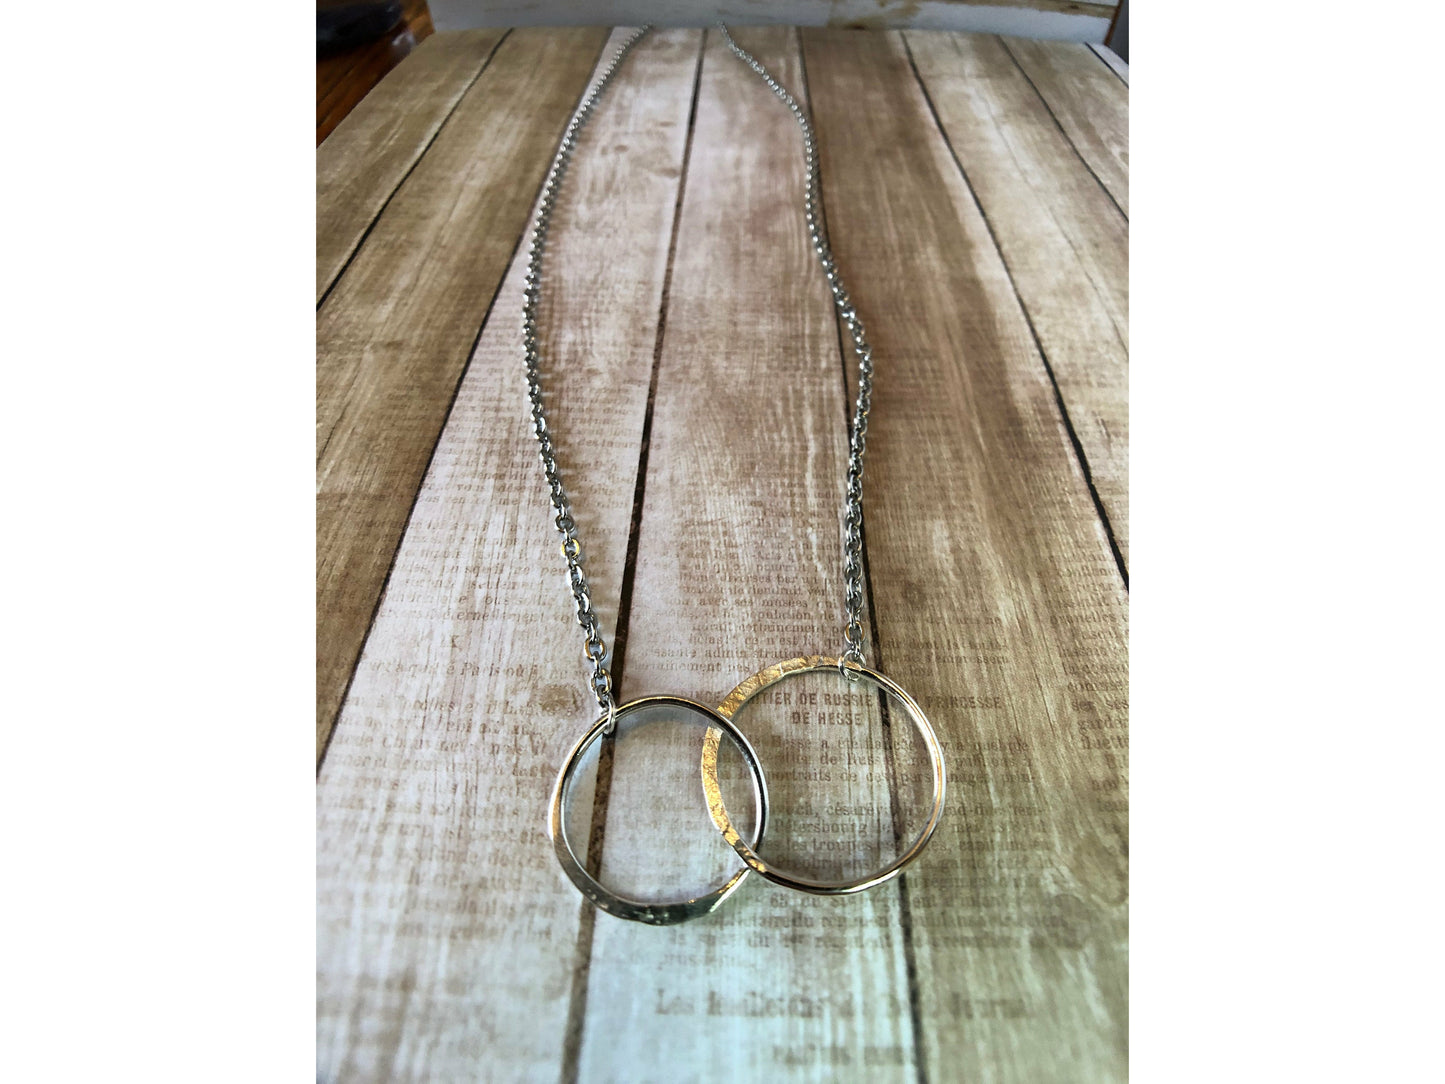 interlocking-circle-necklace-sterling-silver-infinity-necklace-mother-and-child-necklace-double-circle-necklace-silver-geometric-jewelry